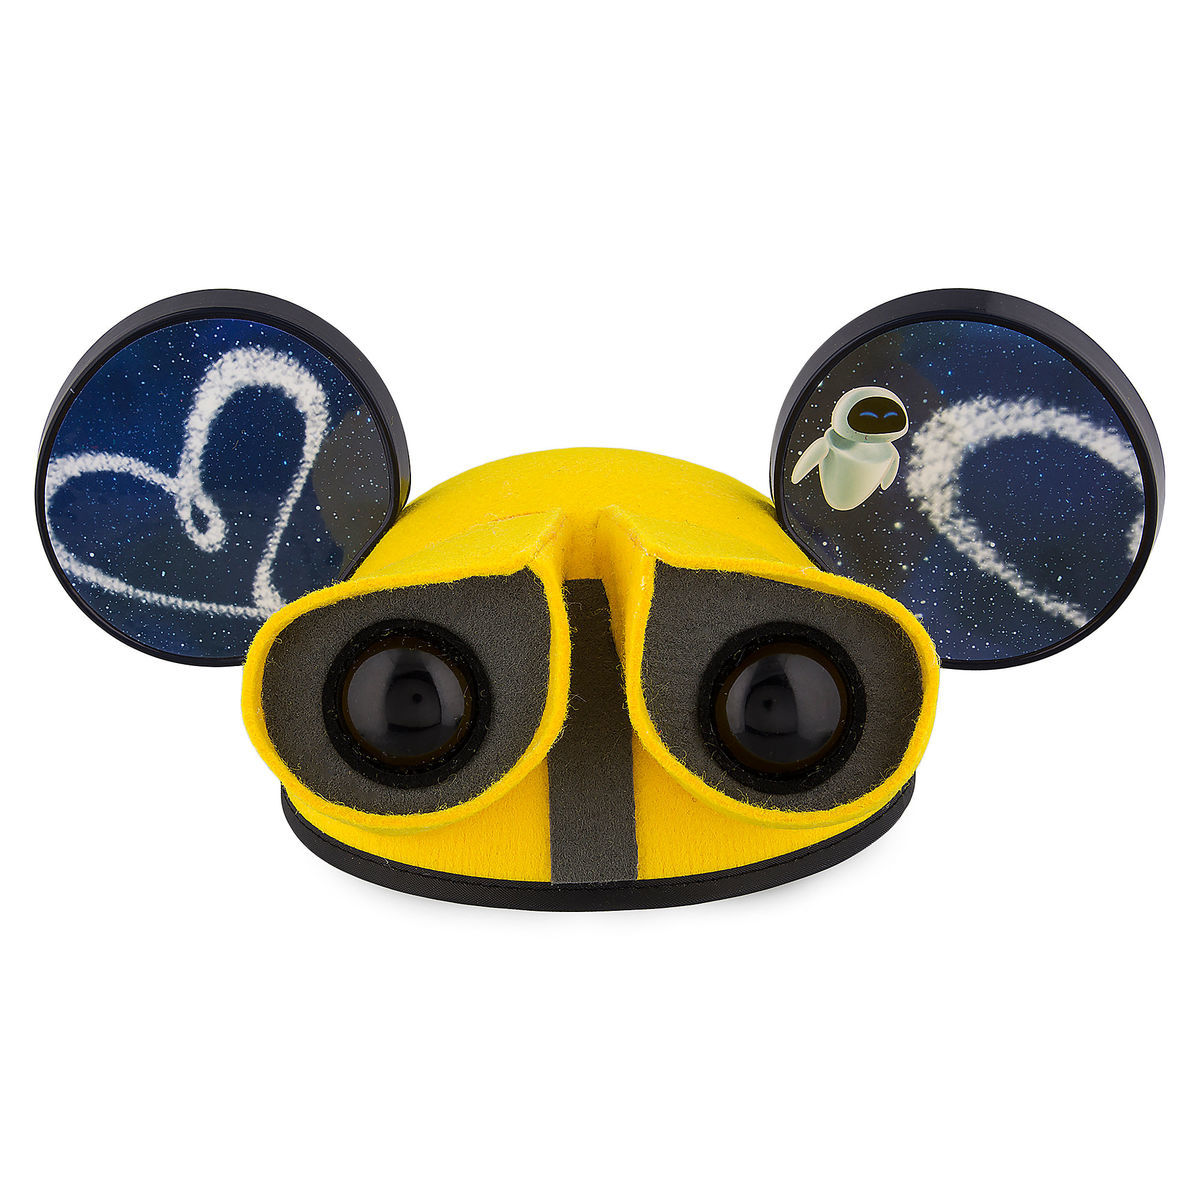 Disney Parks Pixar Wall-E Ear Hat New with Tags